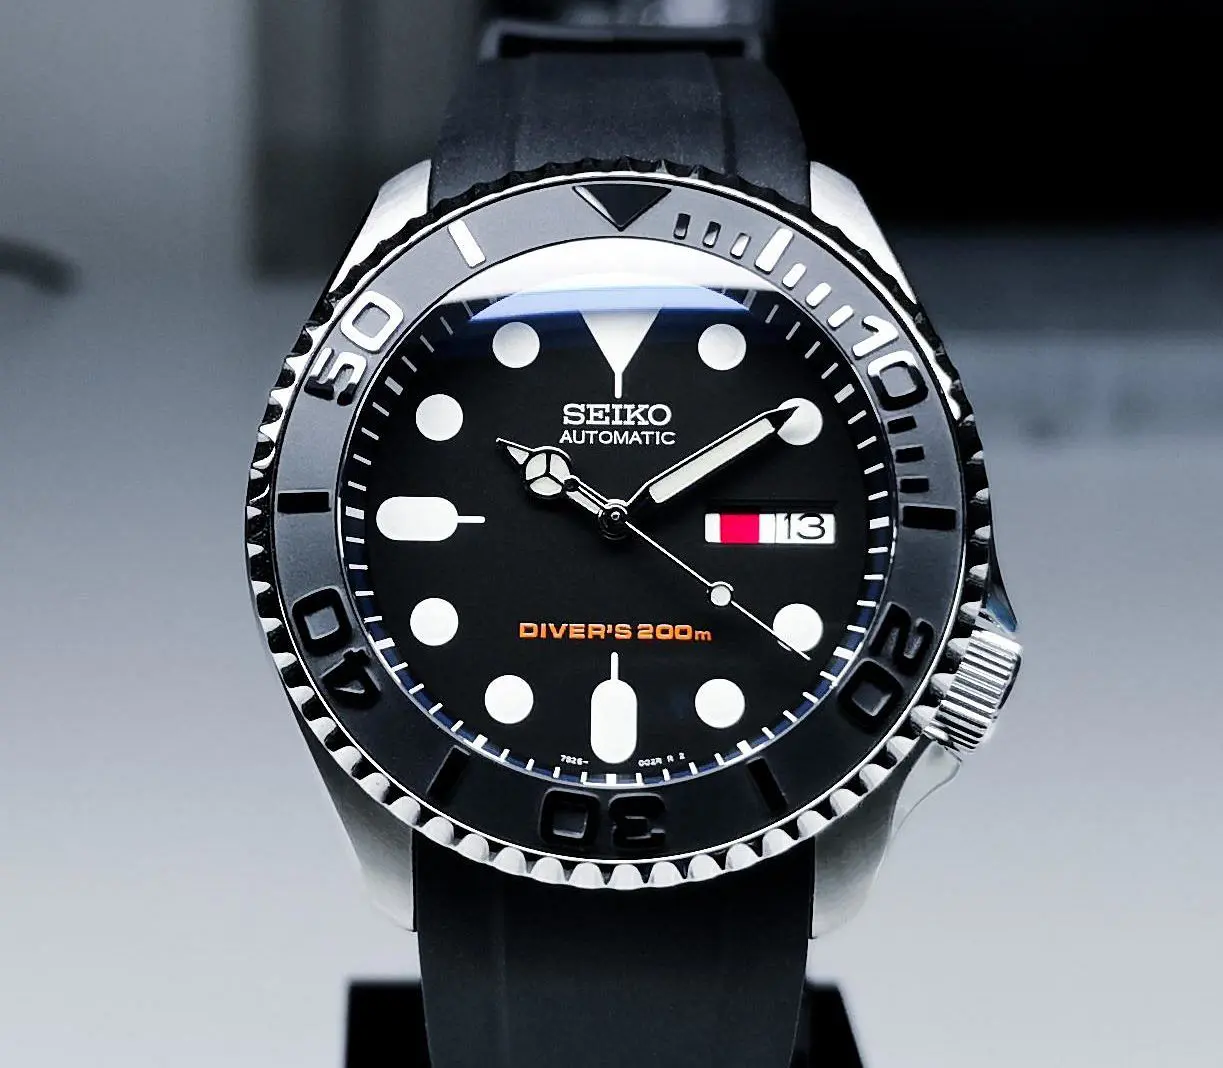 7 Seiko mods show why it's becoming a big thing - from Black Bay bezels, to Yacht-master do-overs, to painted dials